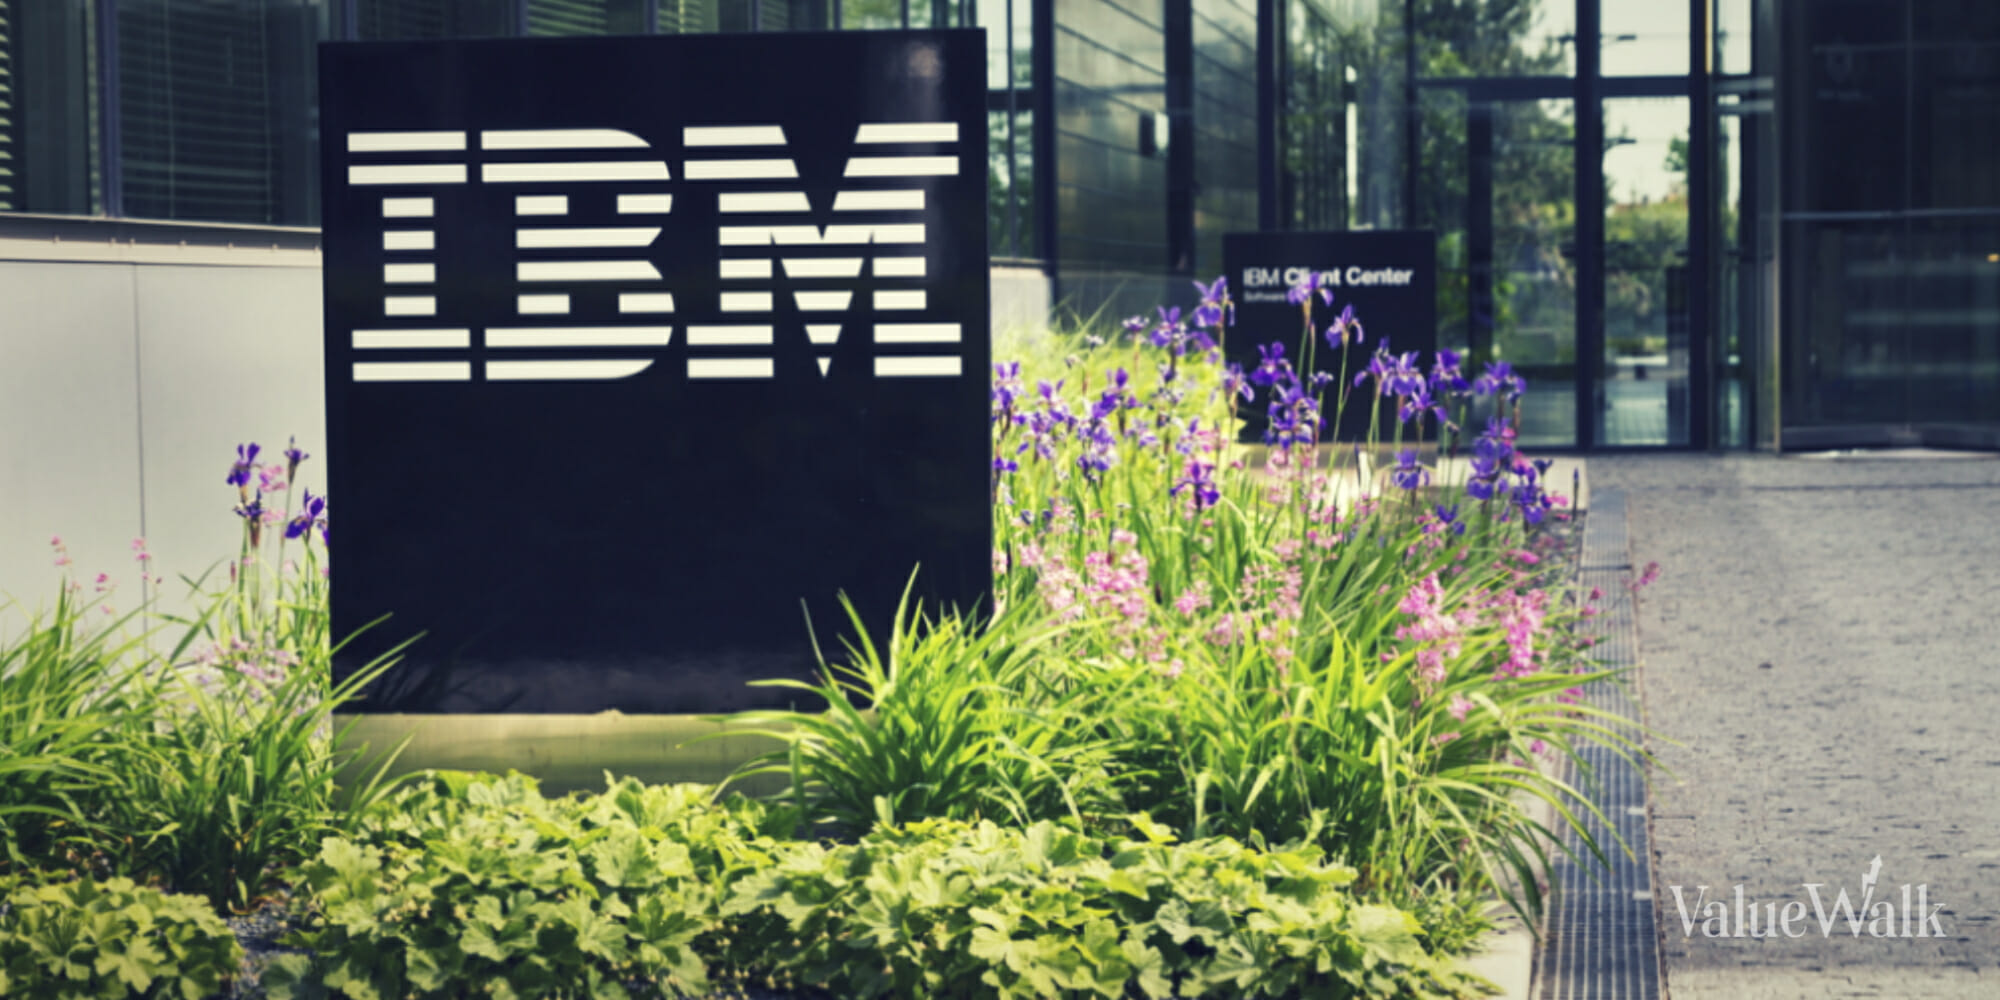 IBM Surpasses Expectations With Impressive $3.87 EPS In Q4 Earnings Report